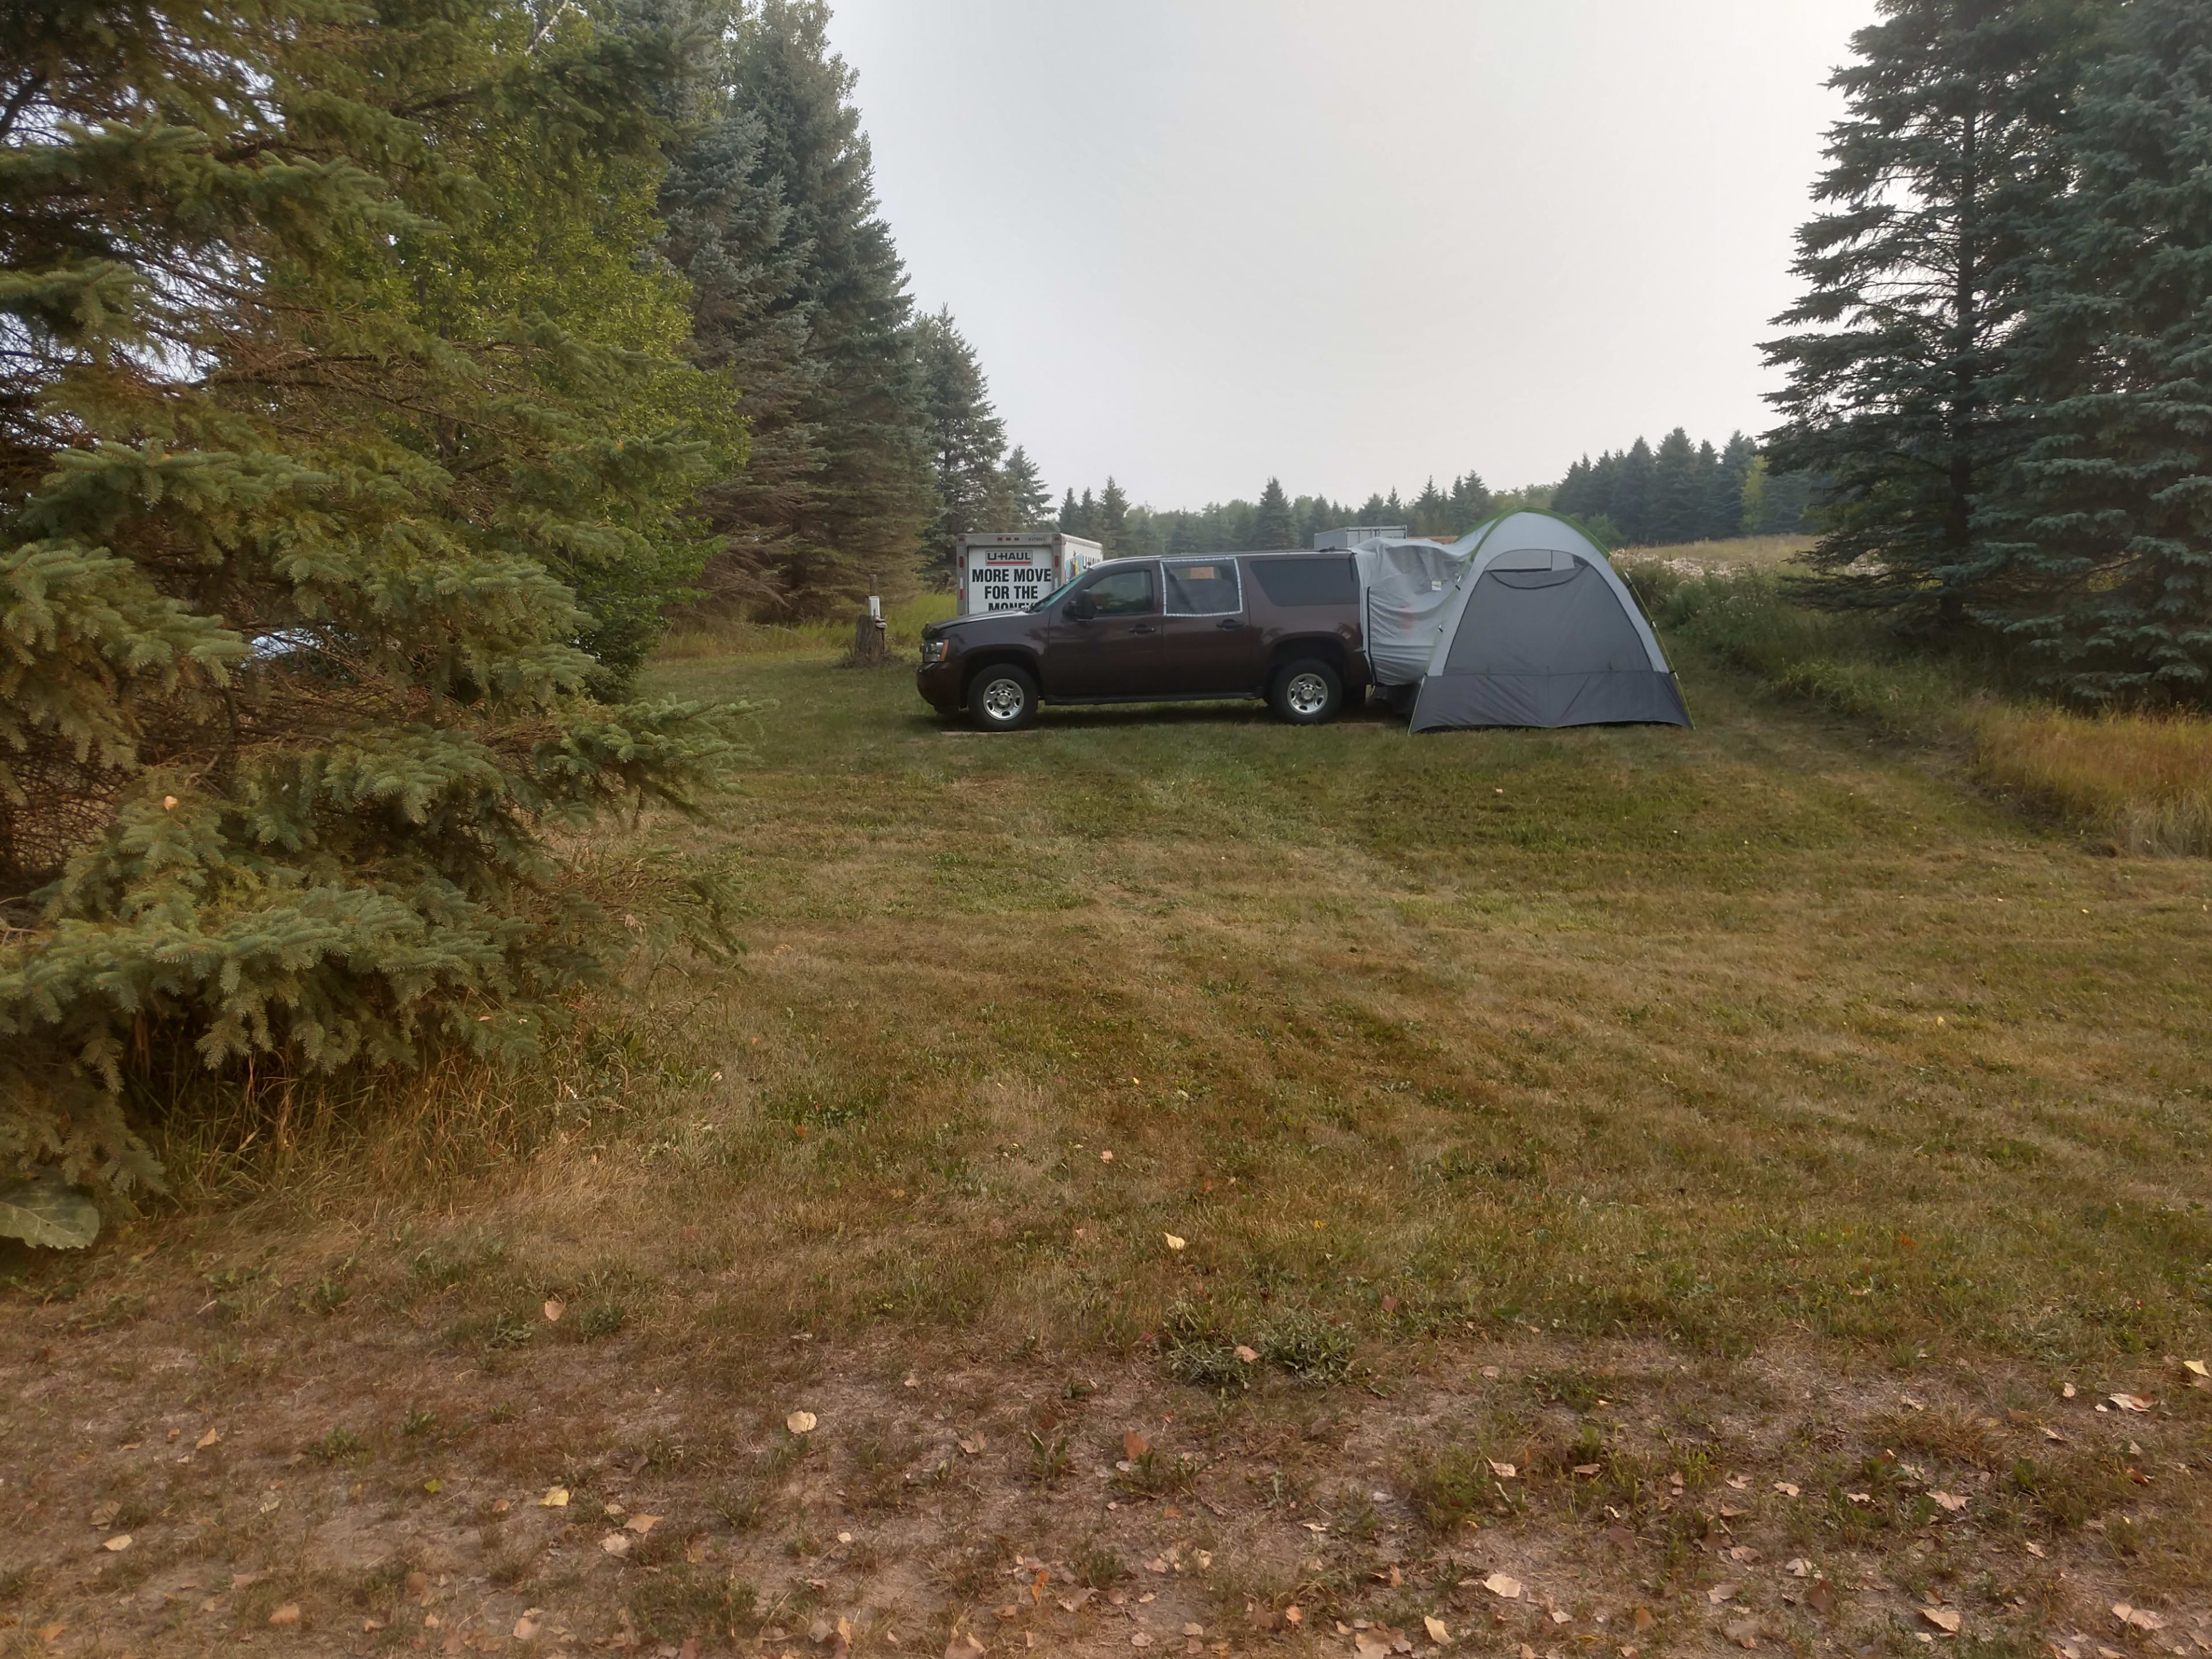 Little campsite on the hill